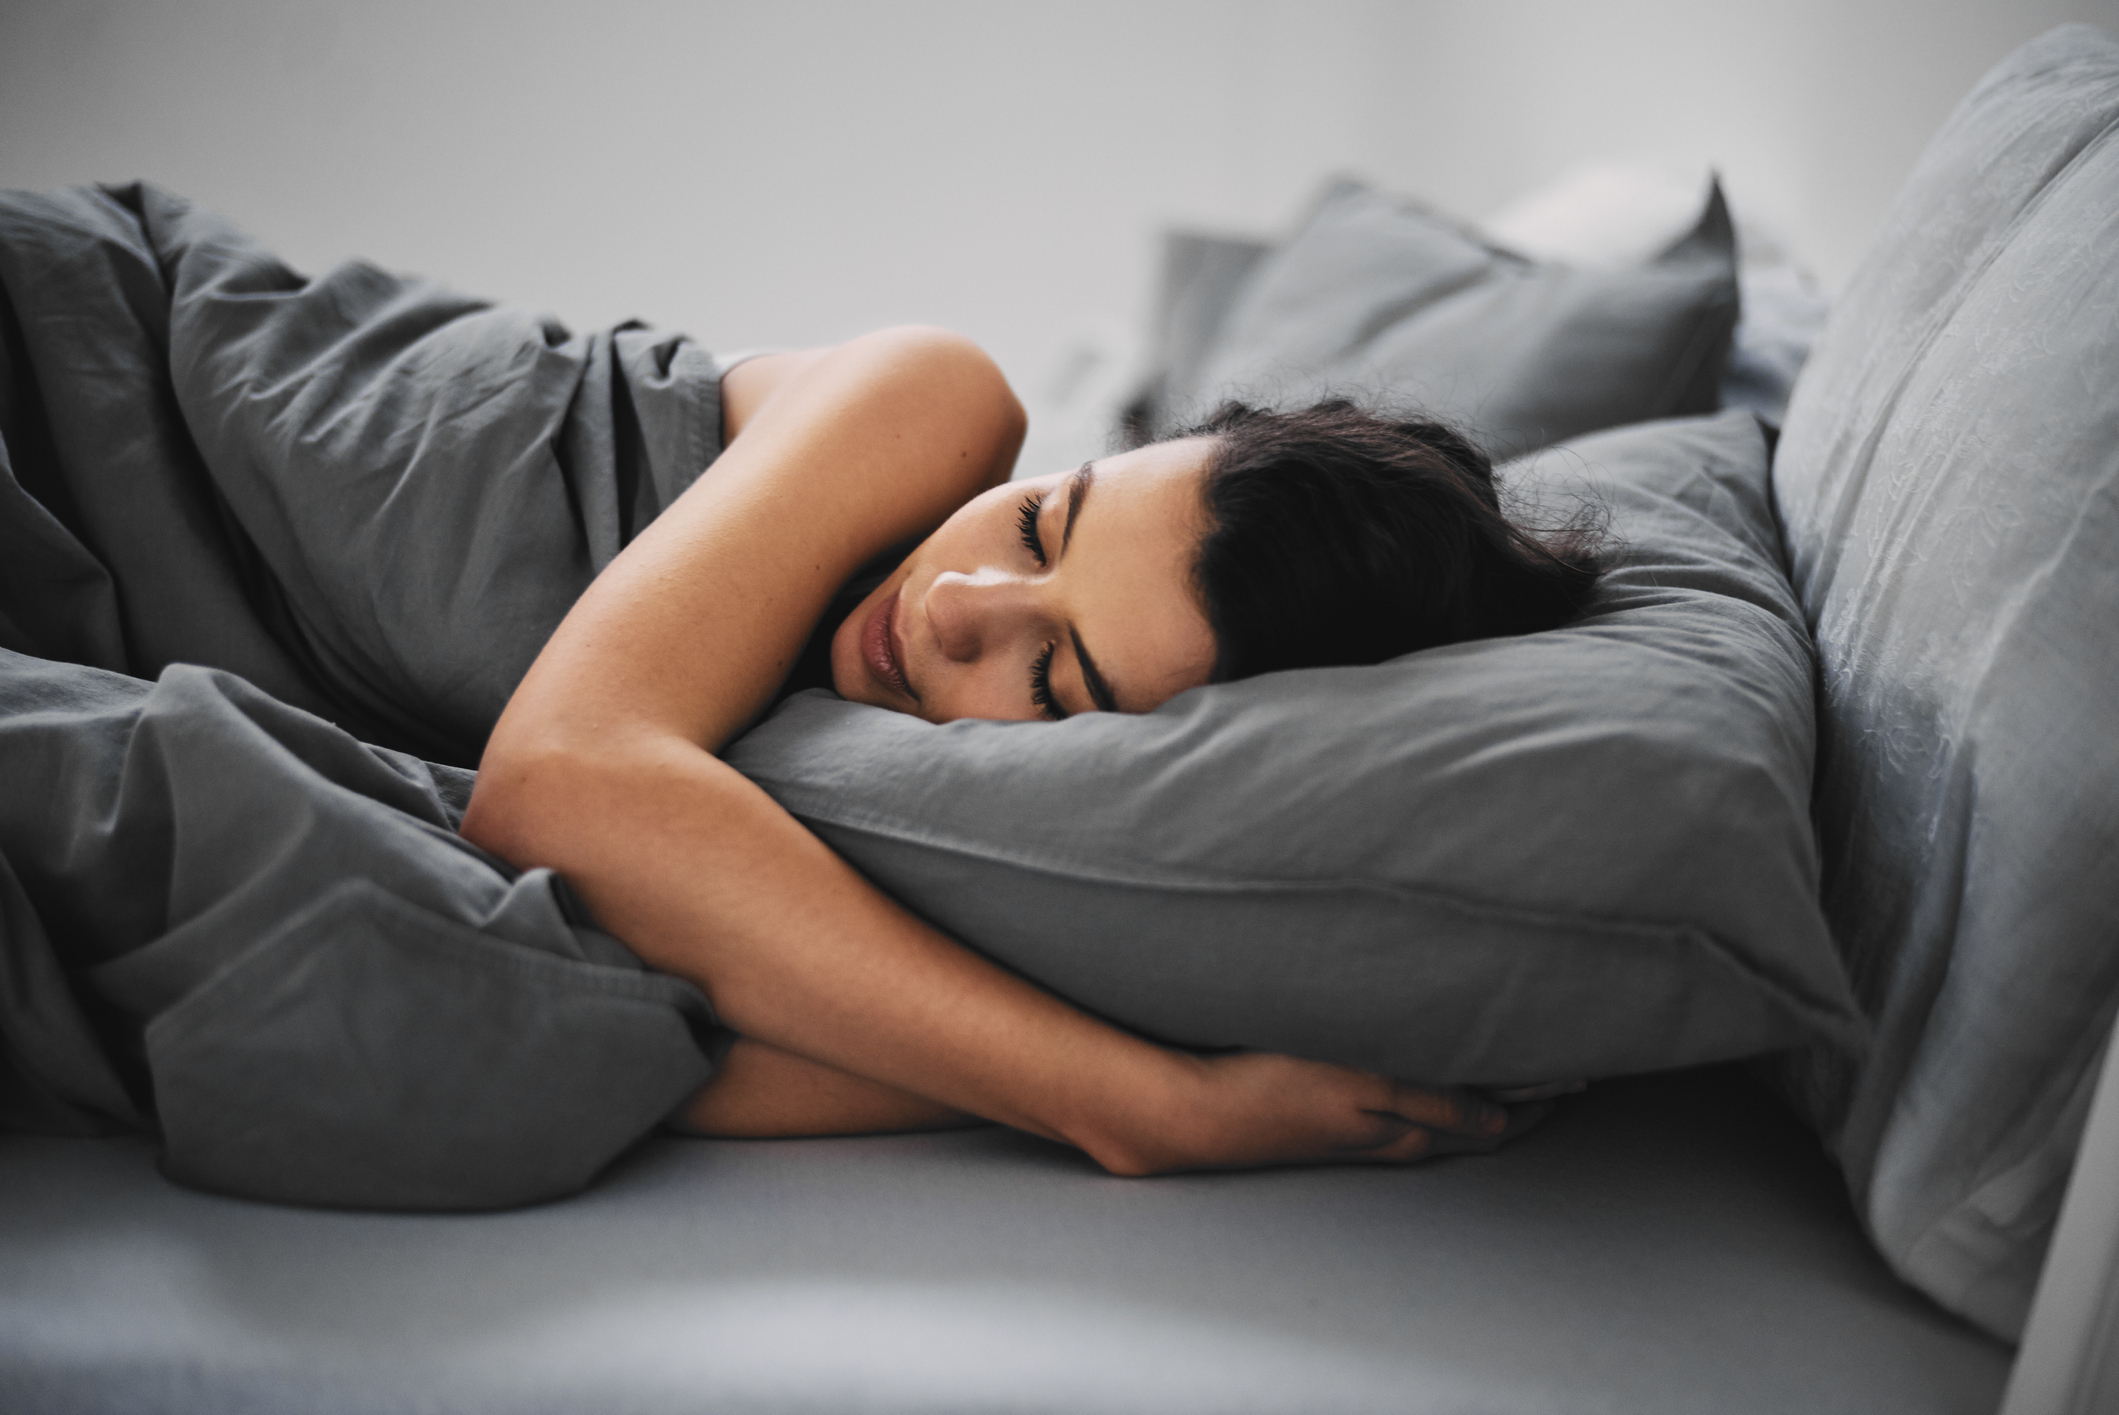 A woman in bed sleeping (Thinkstock/PA)